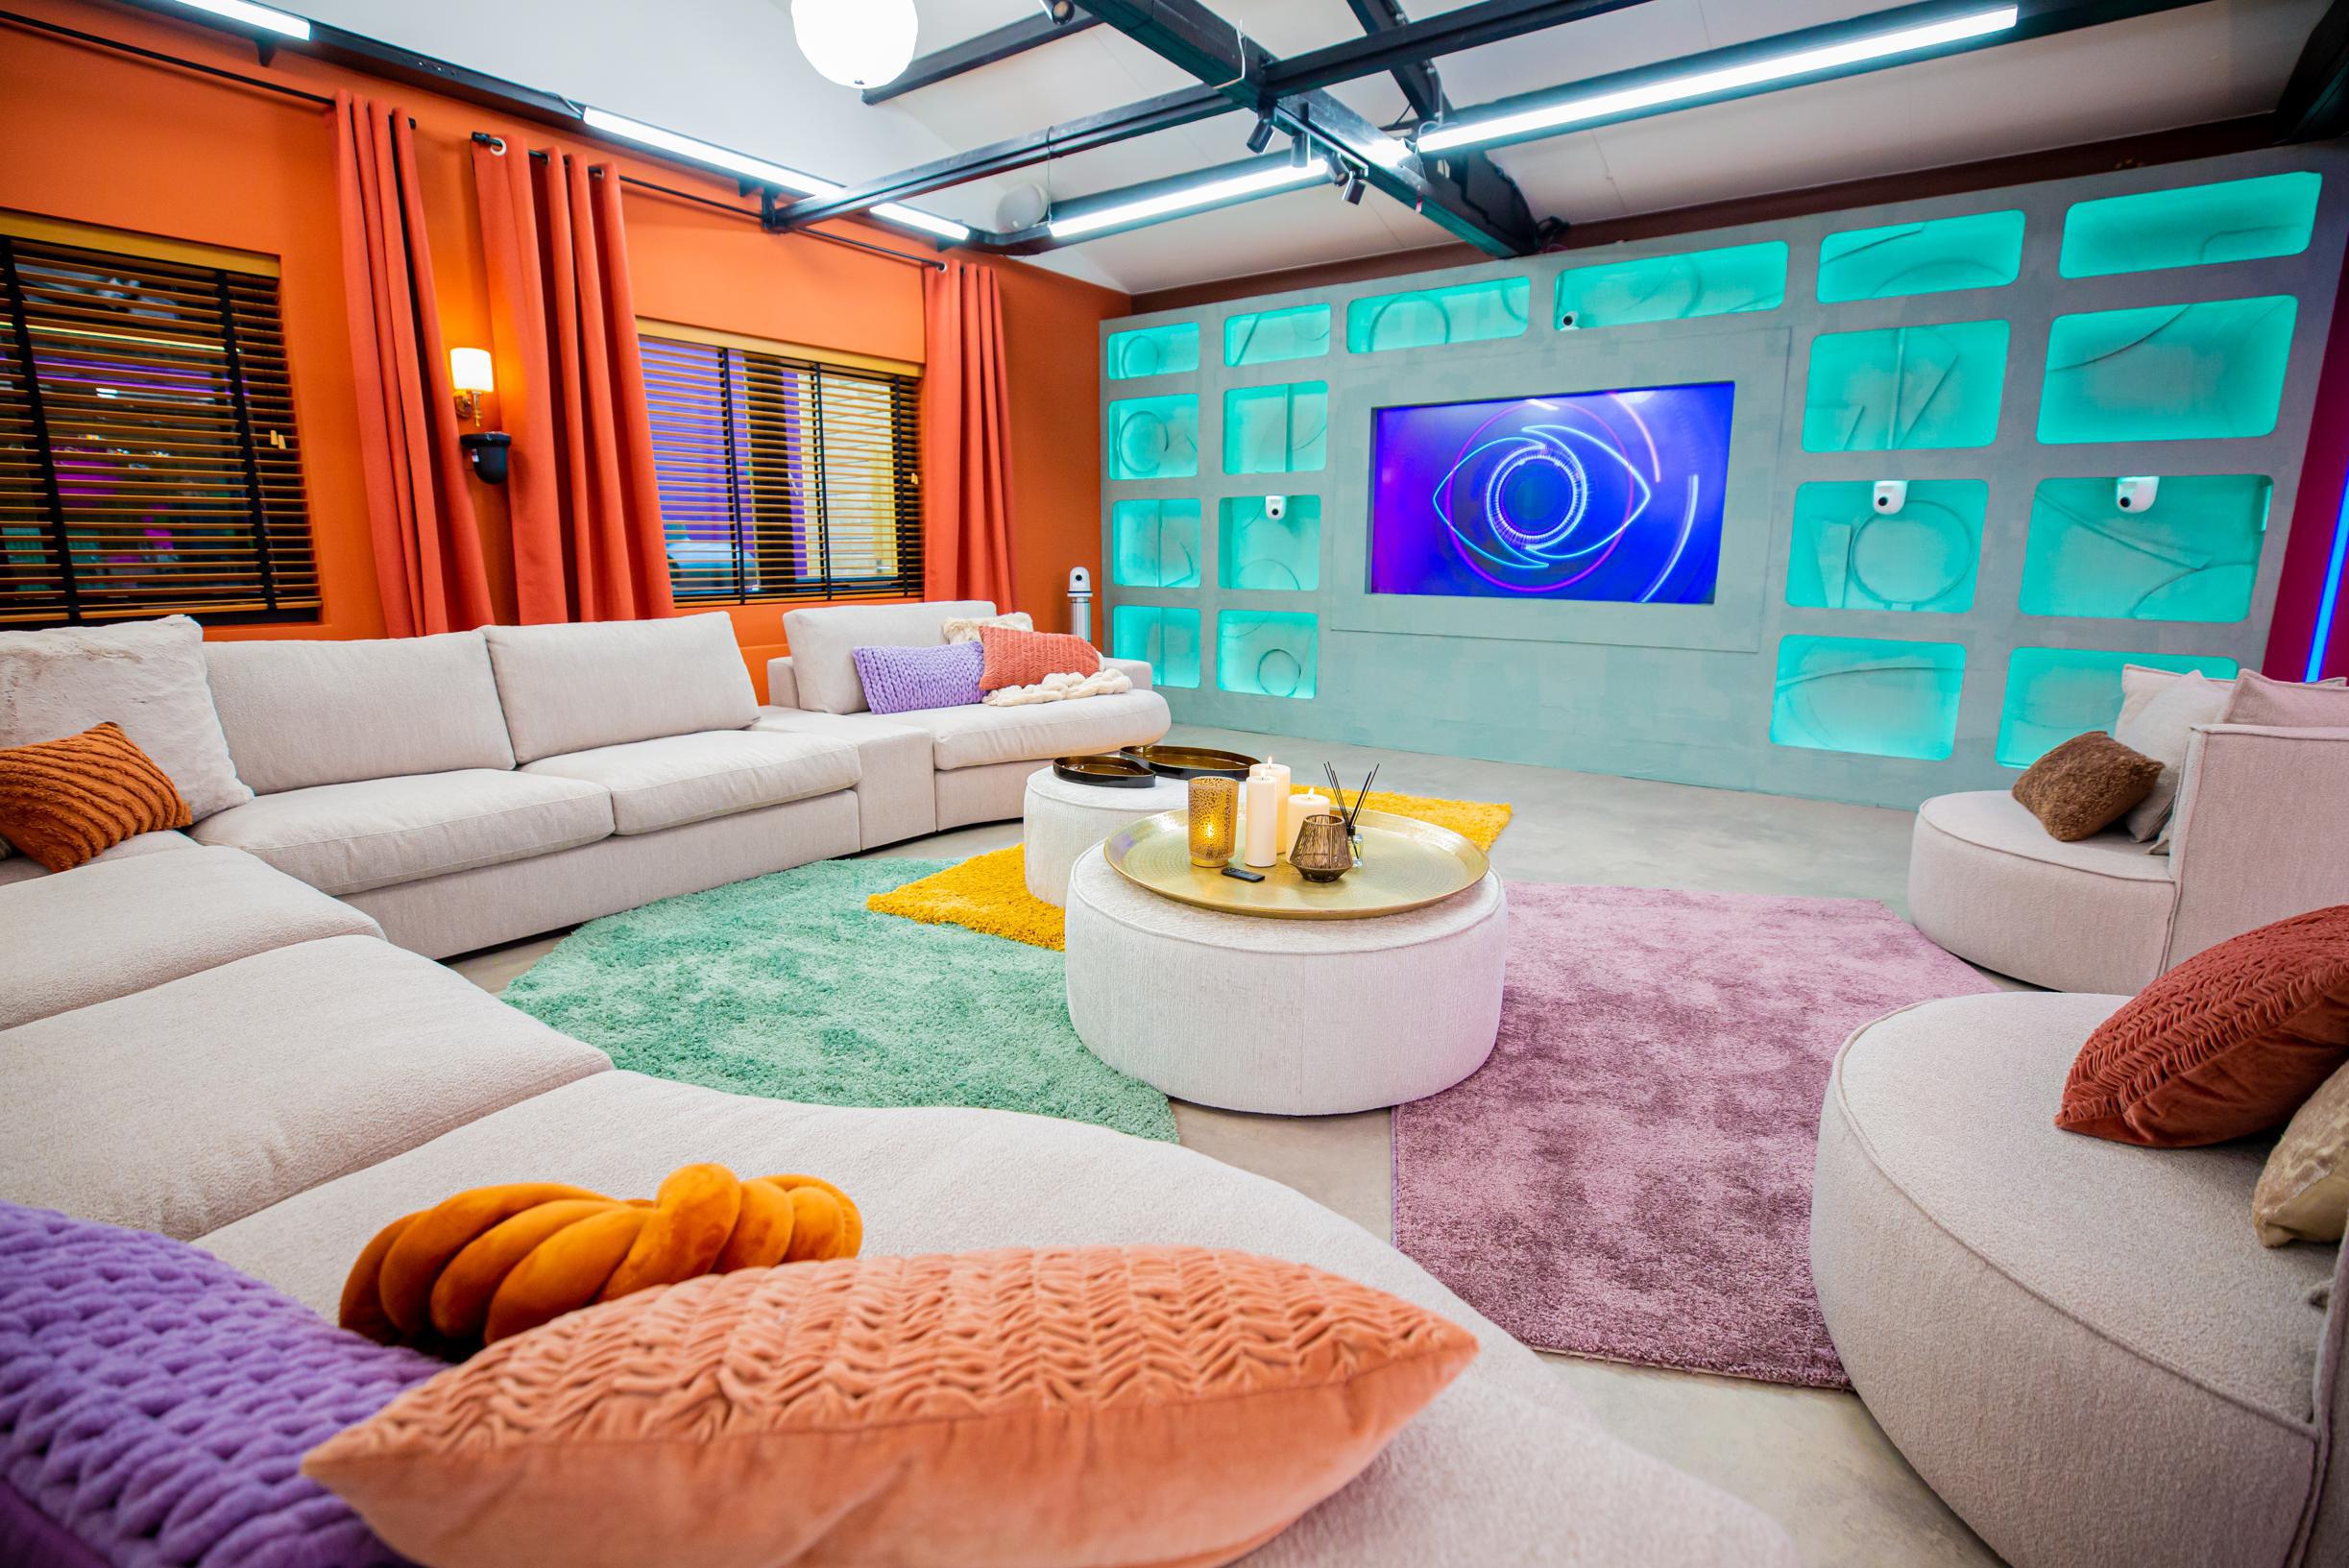 This is what the new "Big Brother" house looks like. World Today News